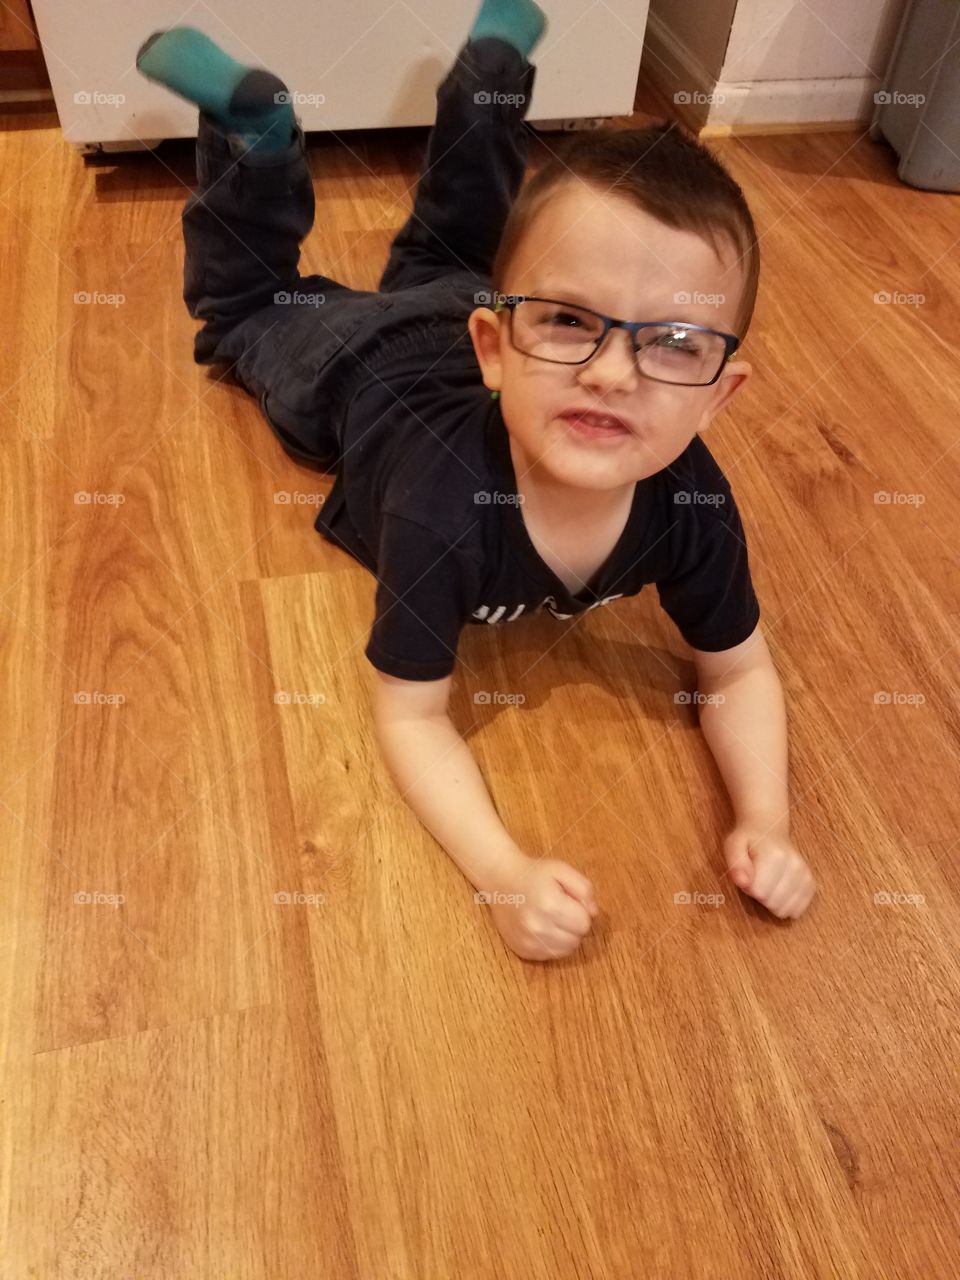 Little boy lying on floor with spectacles